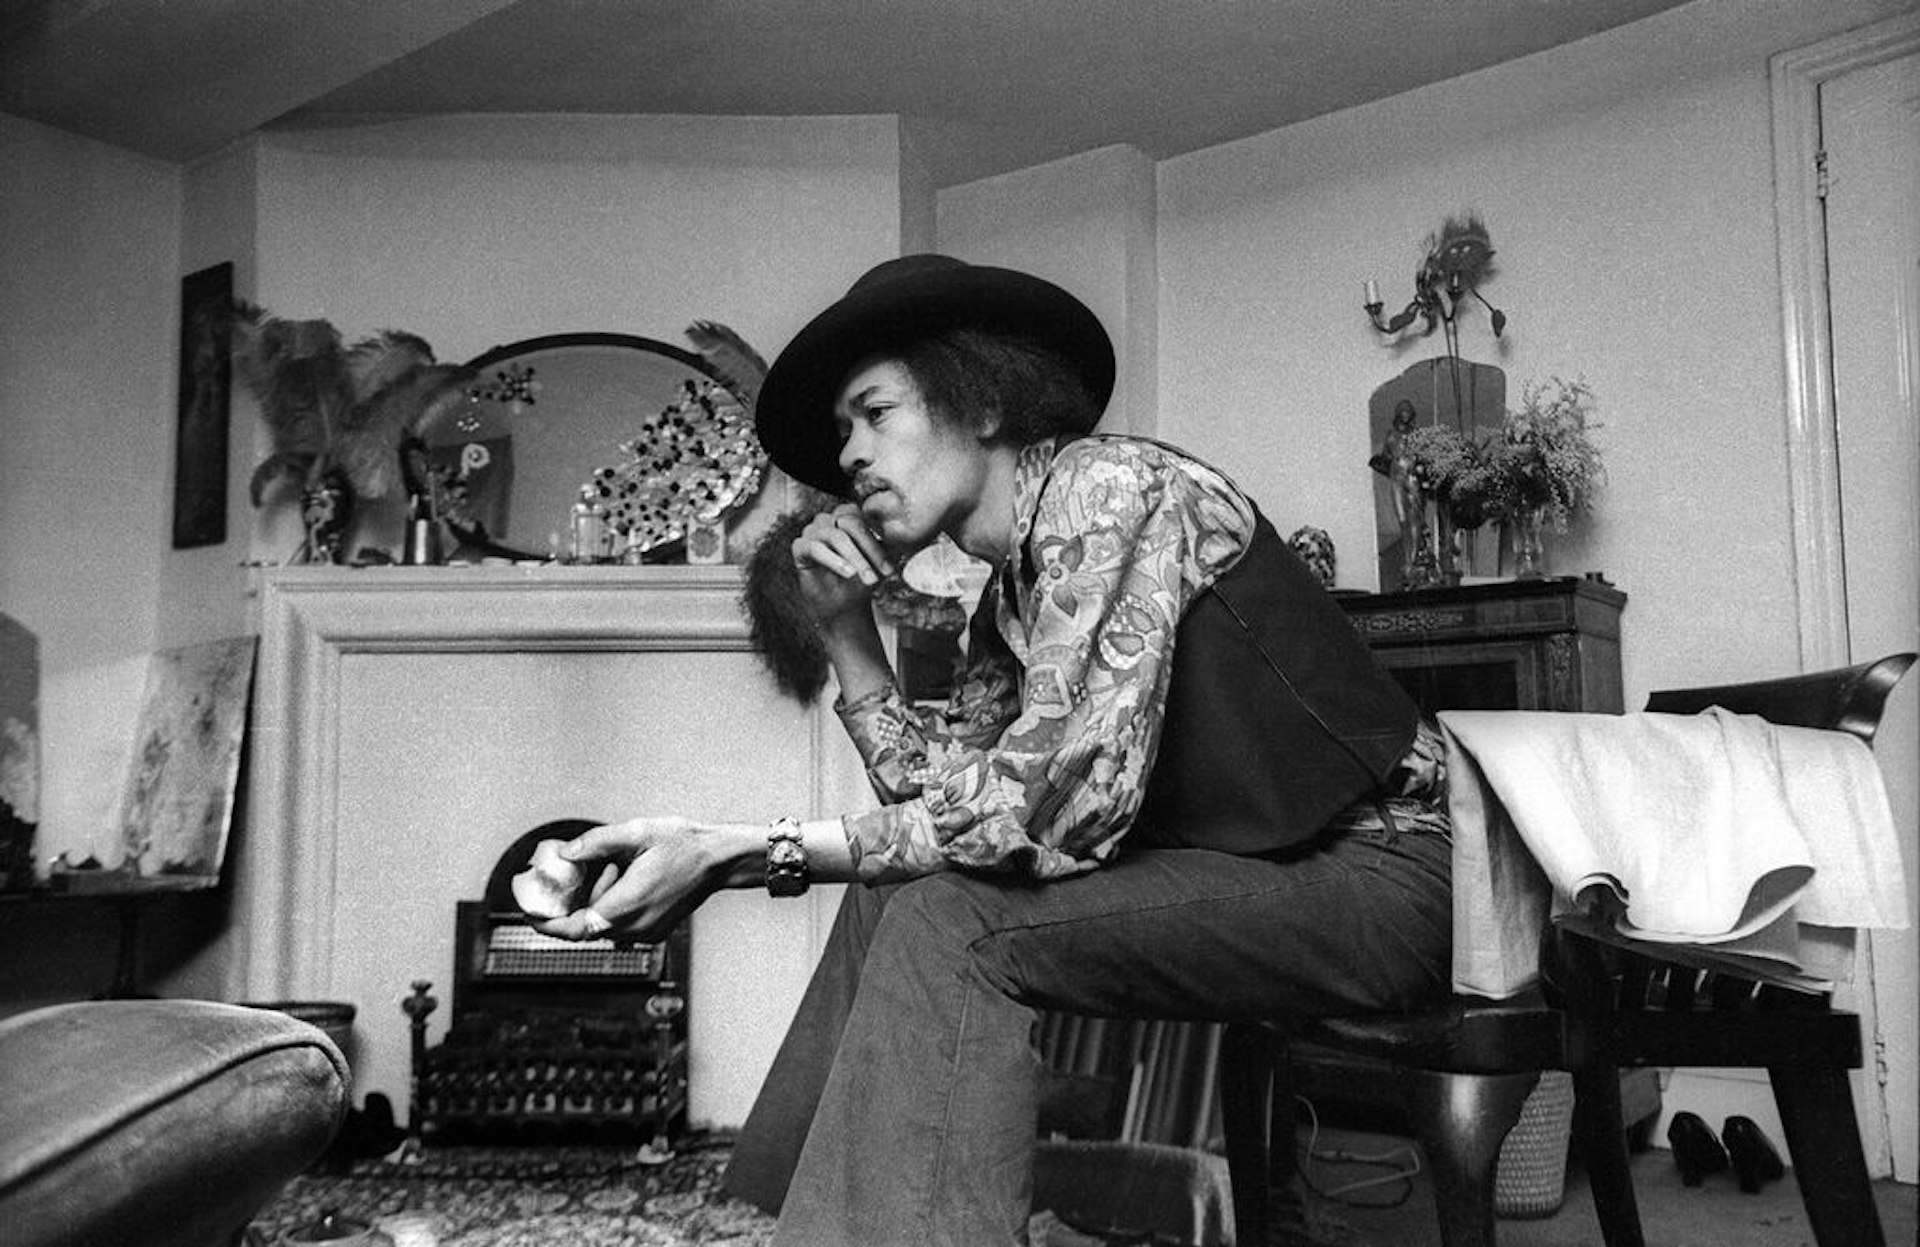 Jimi Hendrix's old London bedroom opens to public exactly how it was in the '60s